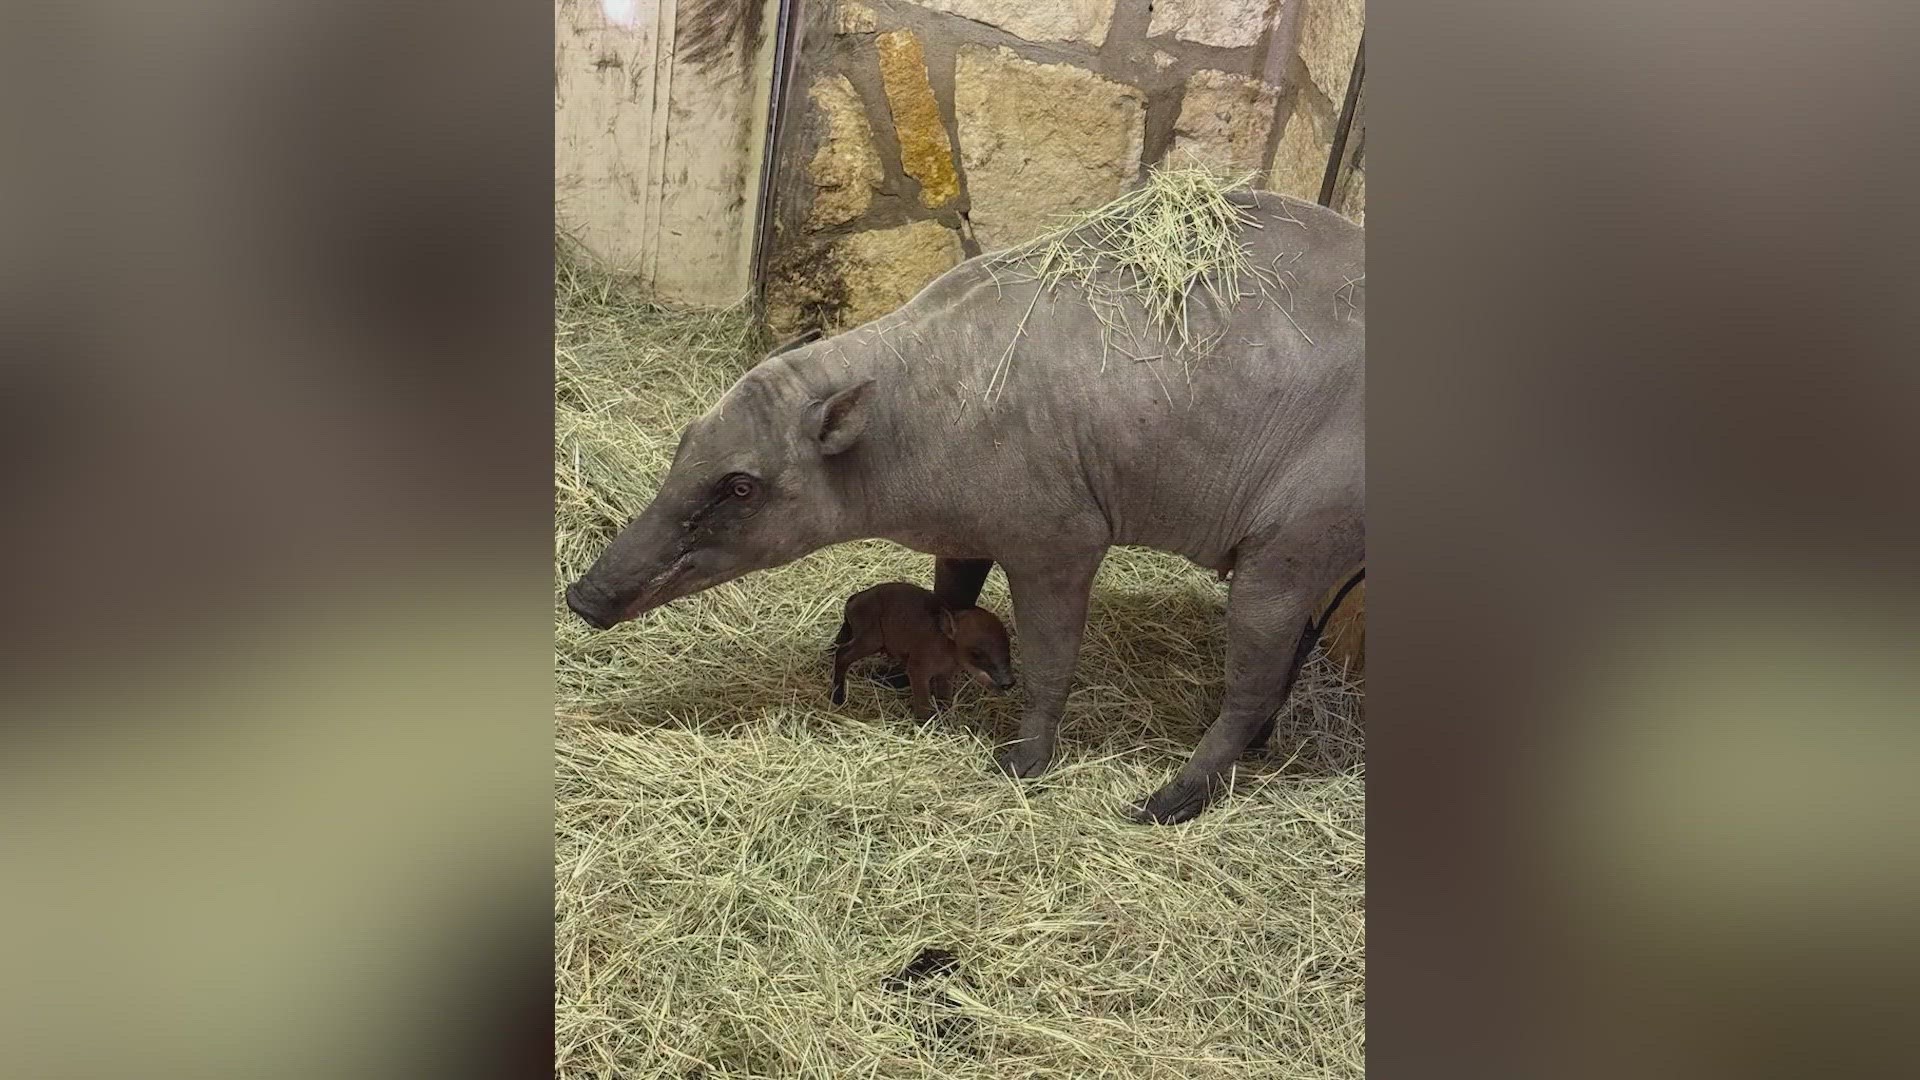 The birth of a babirusa helped them ring in the new year.